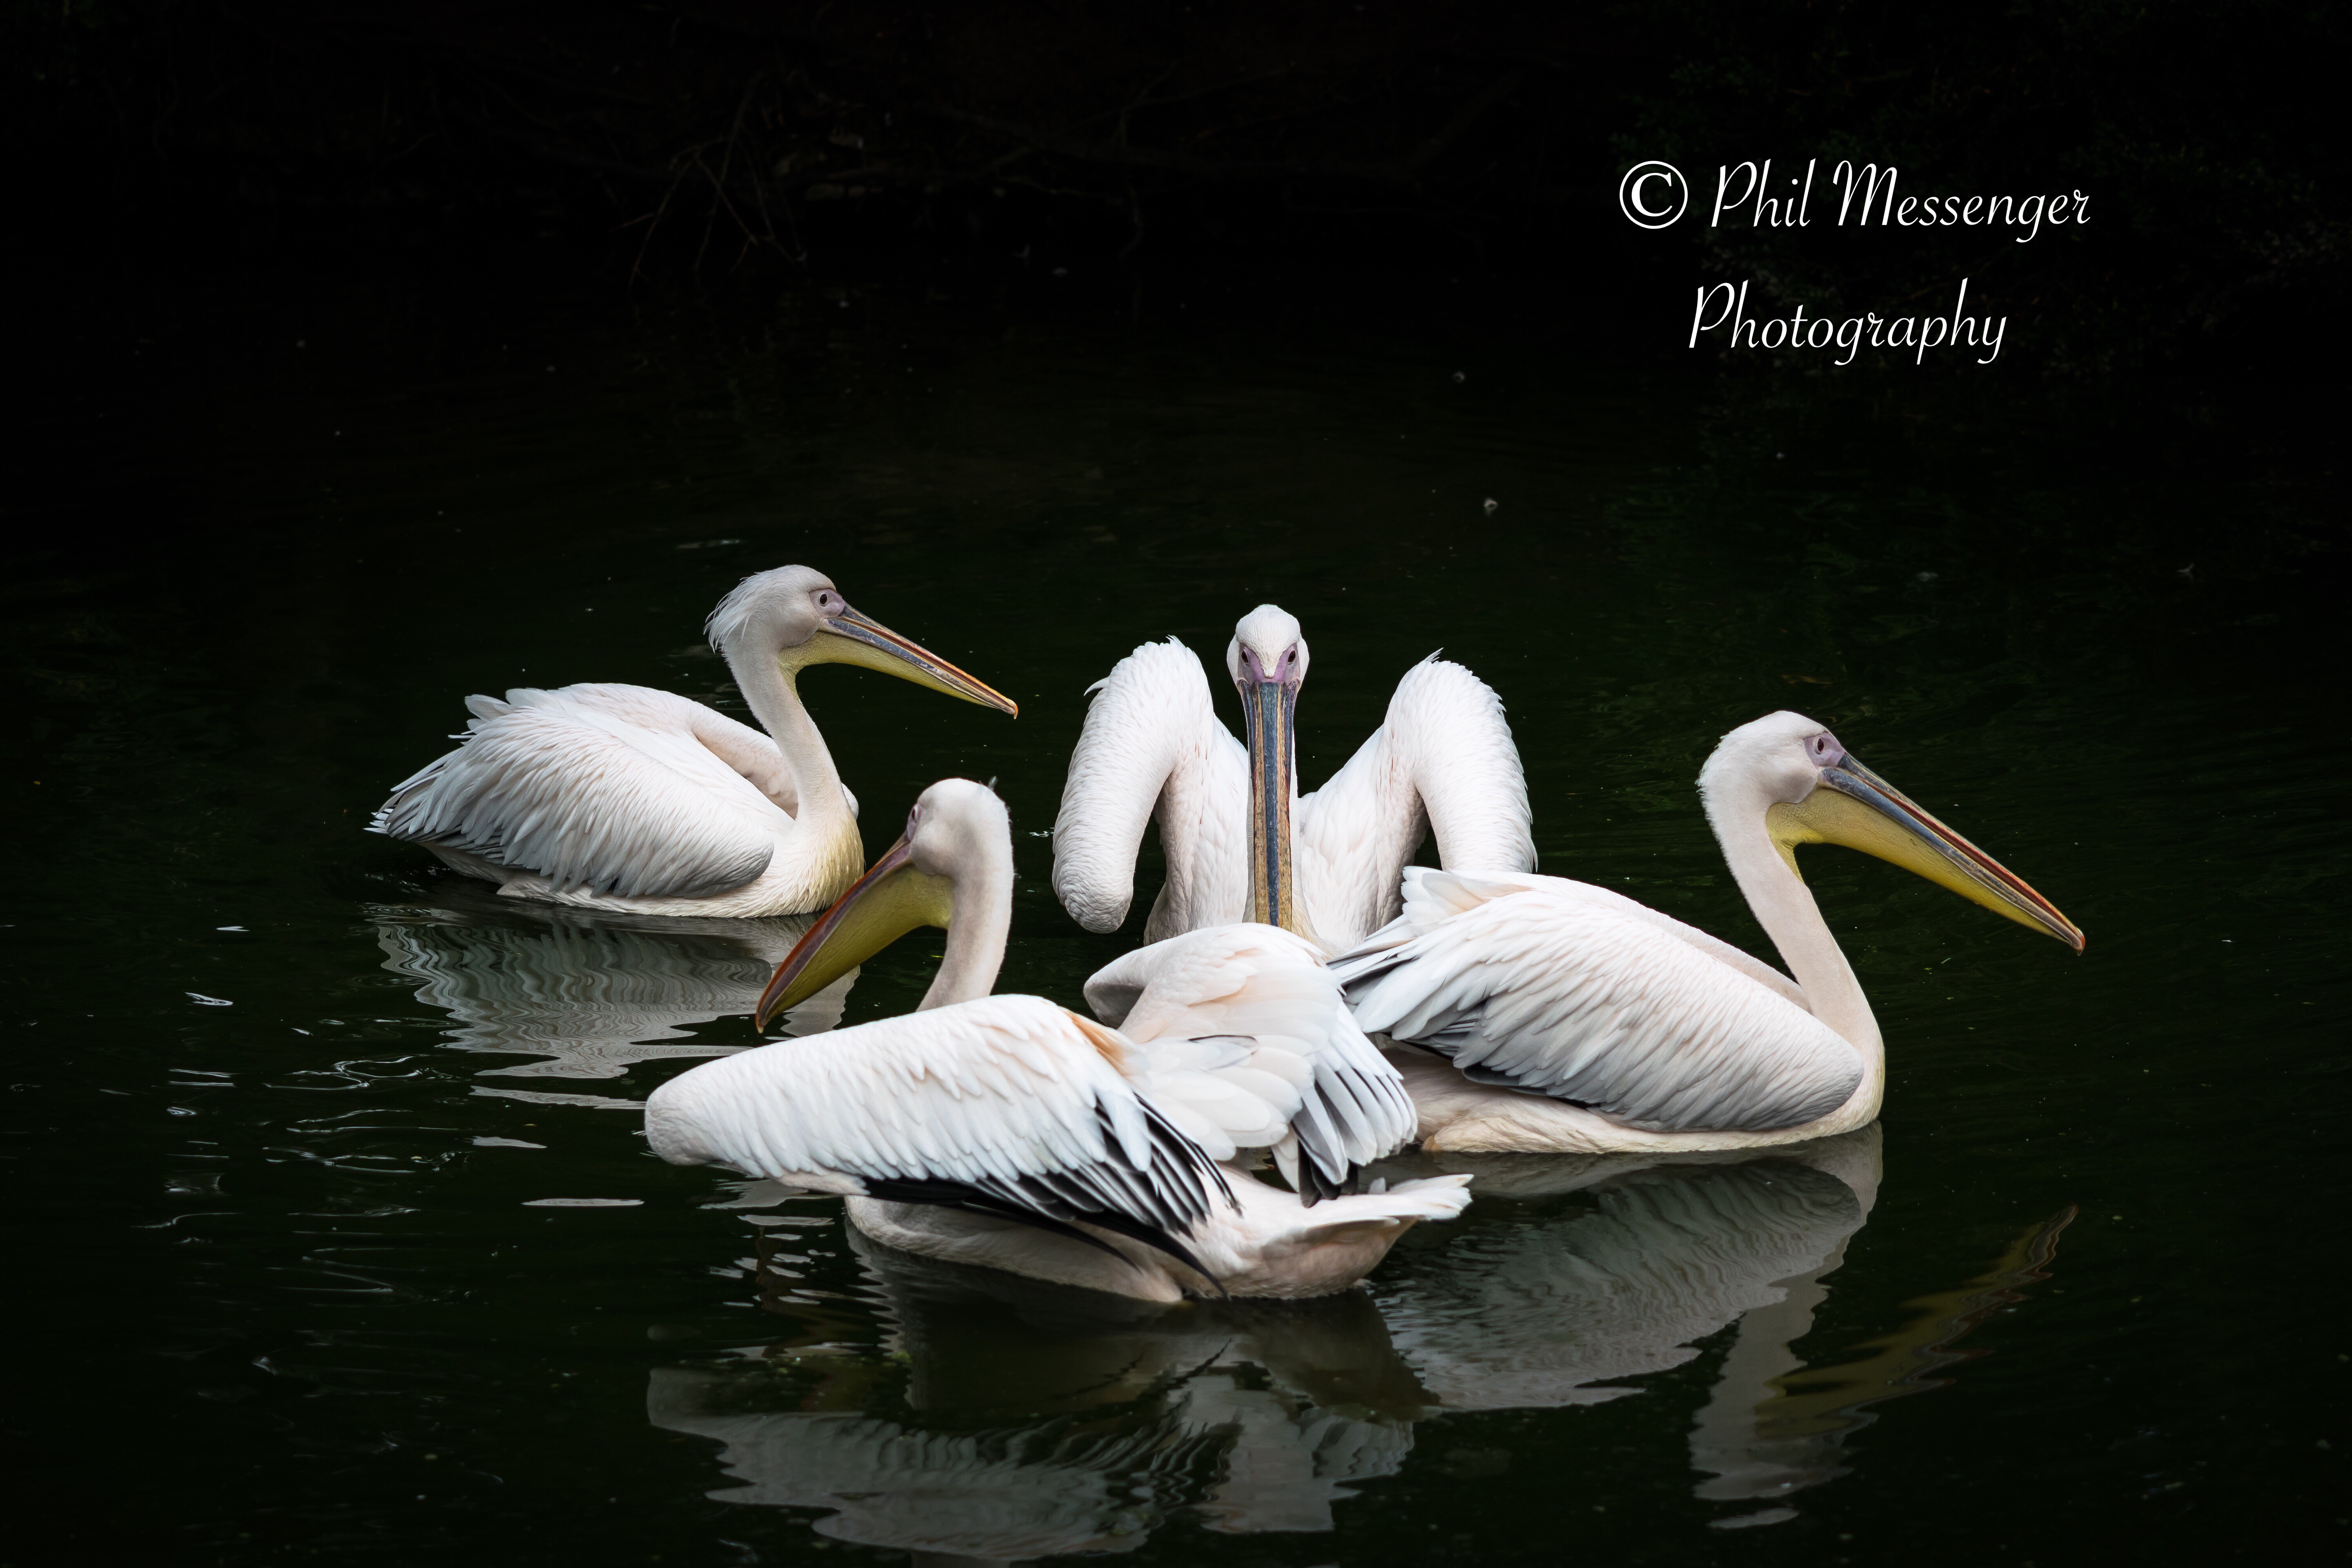 Eastern White Pelicans taken at Cotswold wildlife park, Burford, Oxfordshire